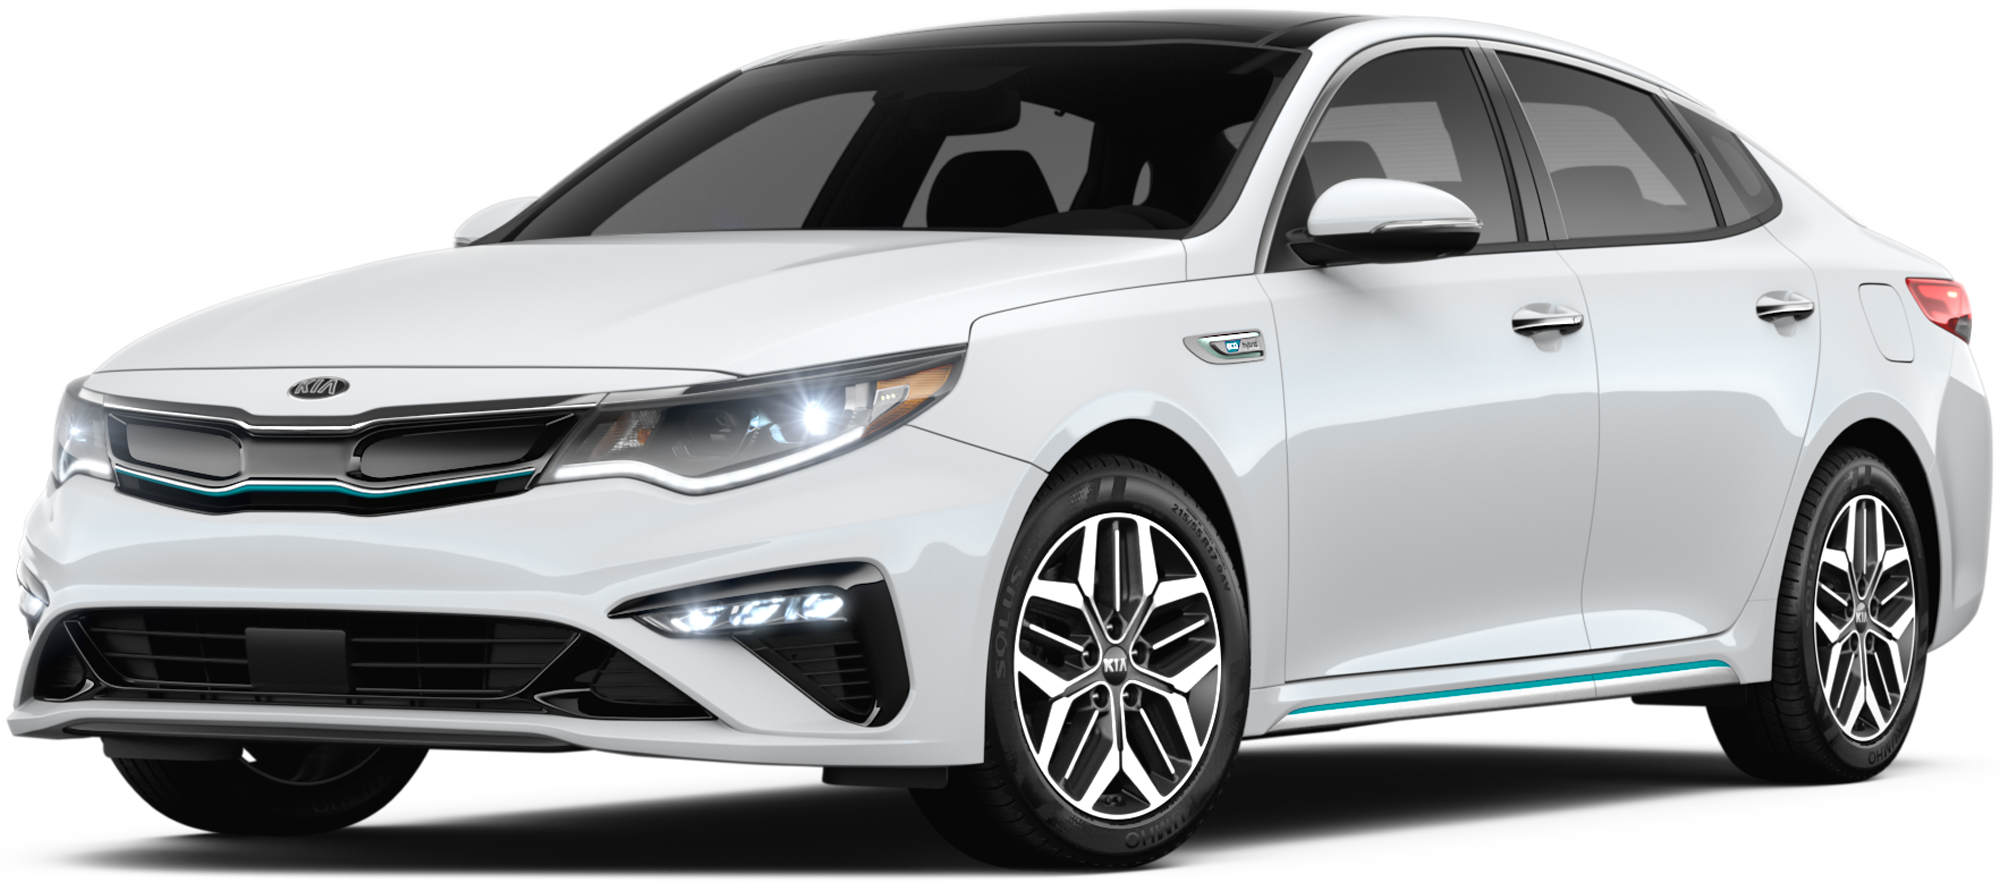 2020-kia-optima-hybrid-incentives-specials-offers-in-johnstown-pa